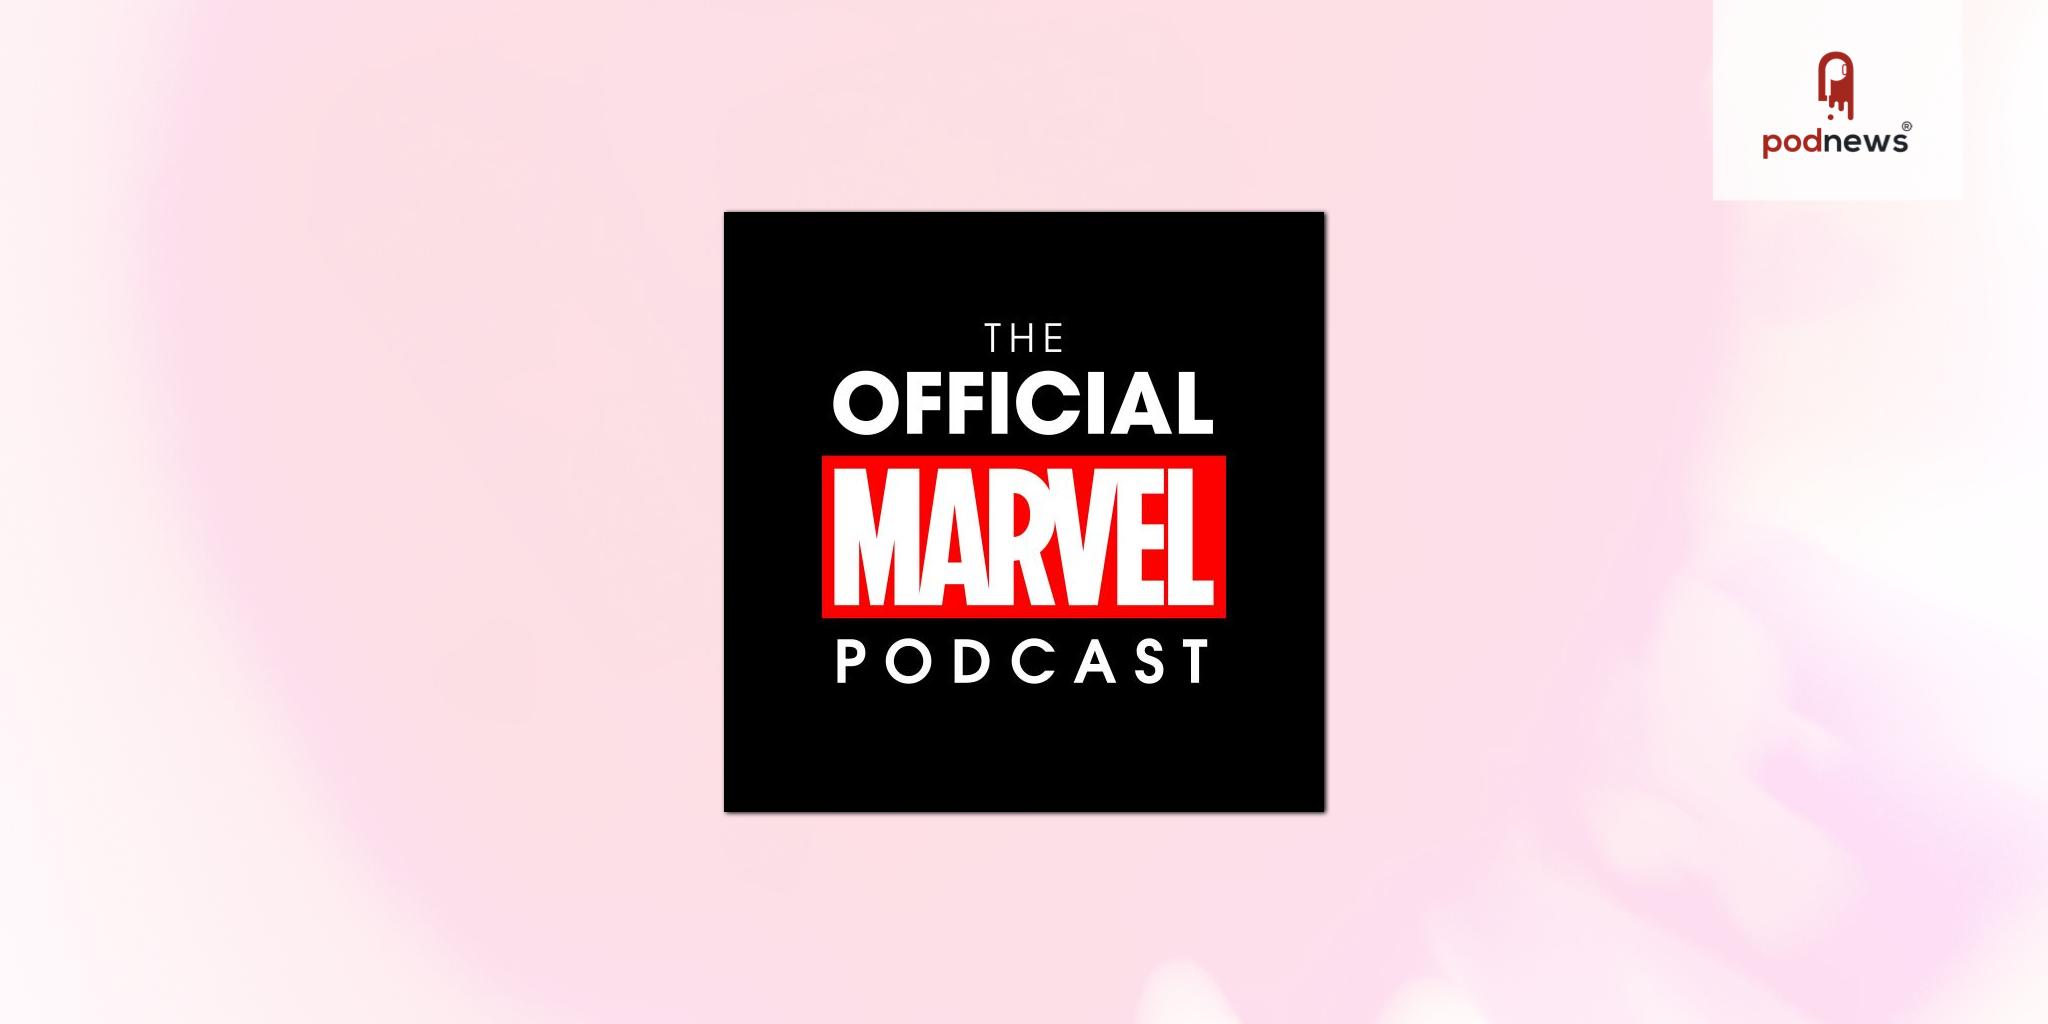 Marvel launches The Official Marvel Podcast